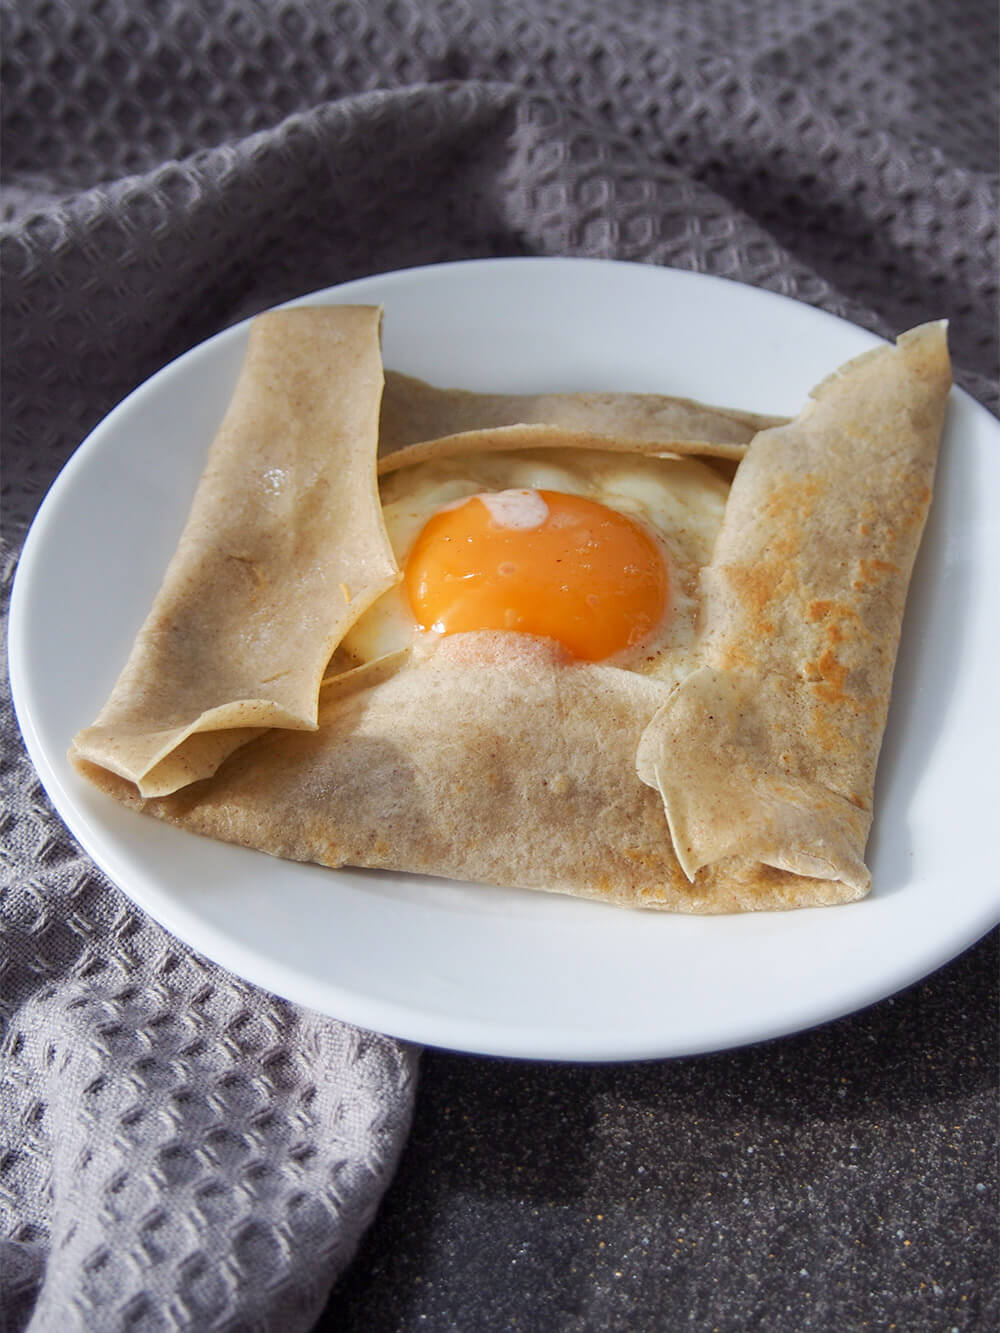 buckwheat crepe with fillings - egg showing - on plate